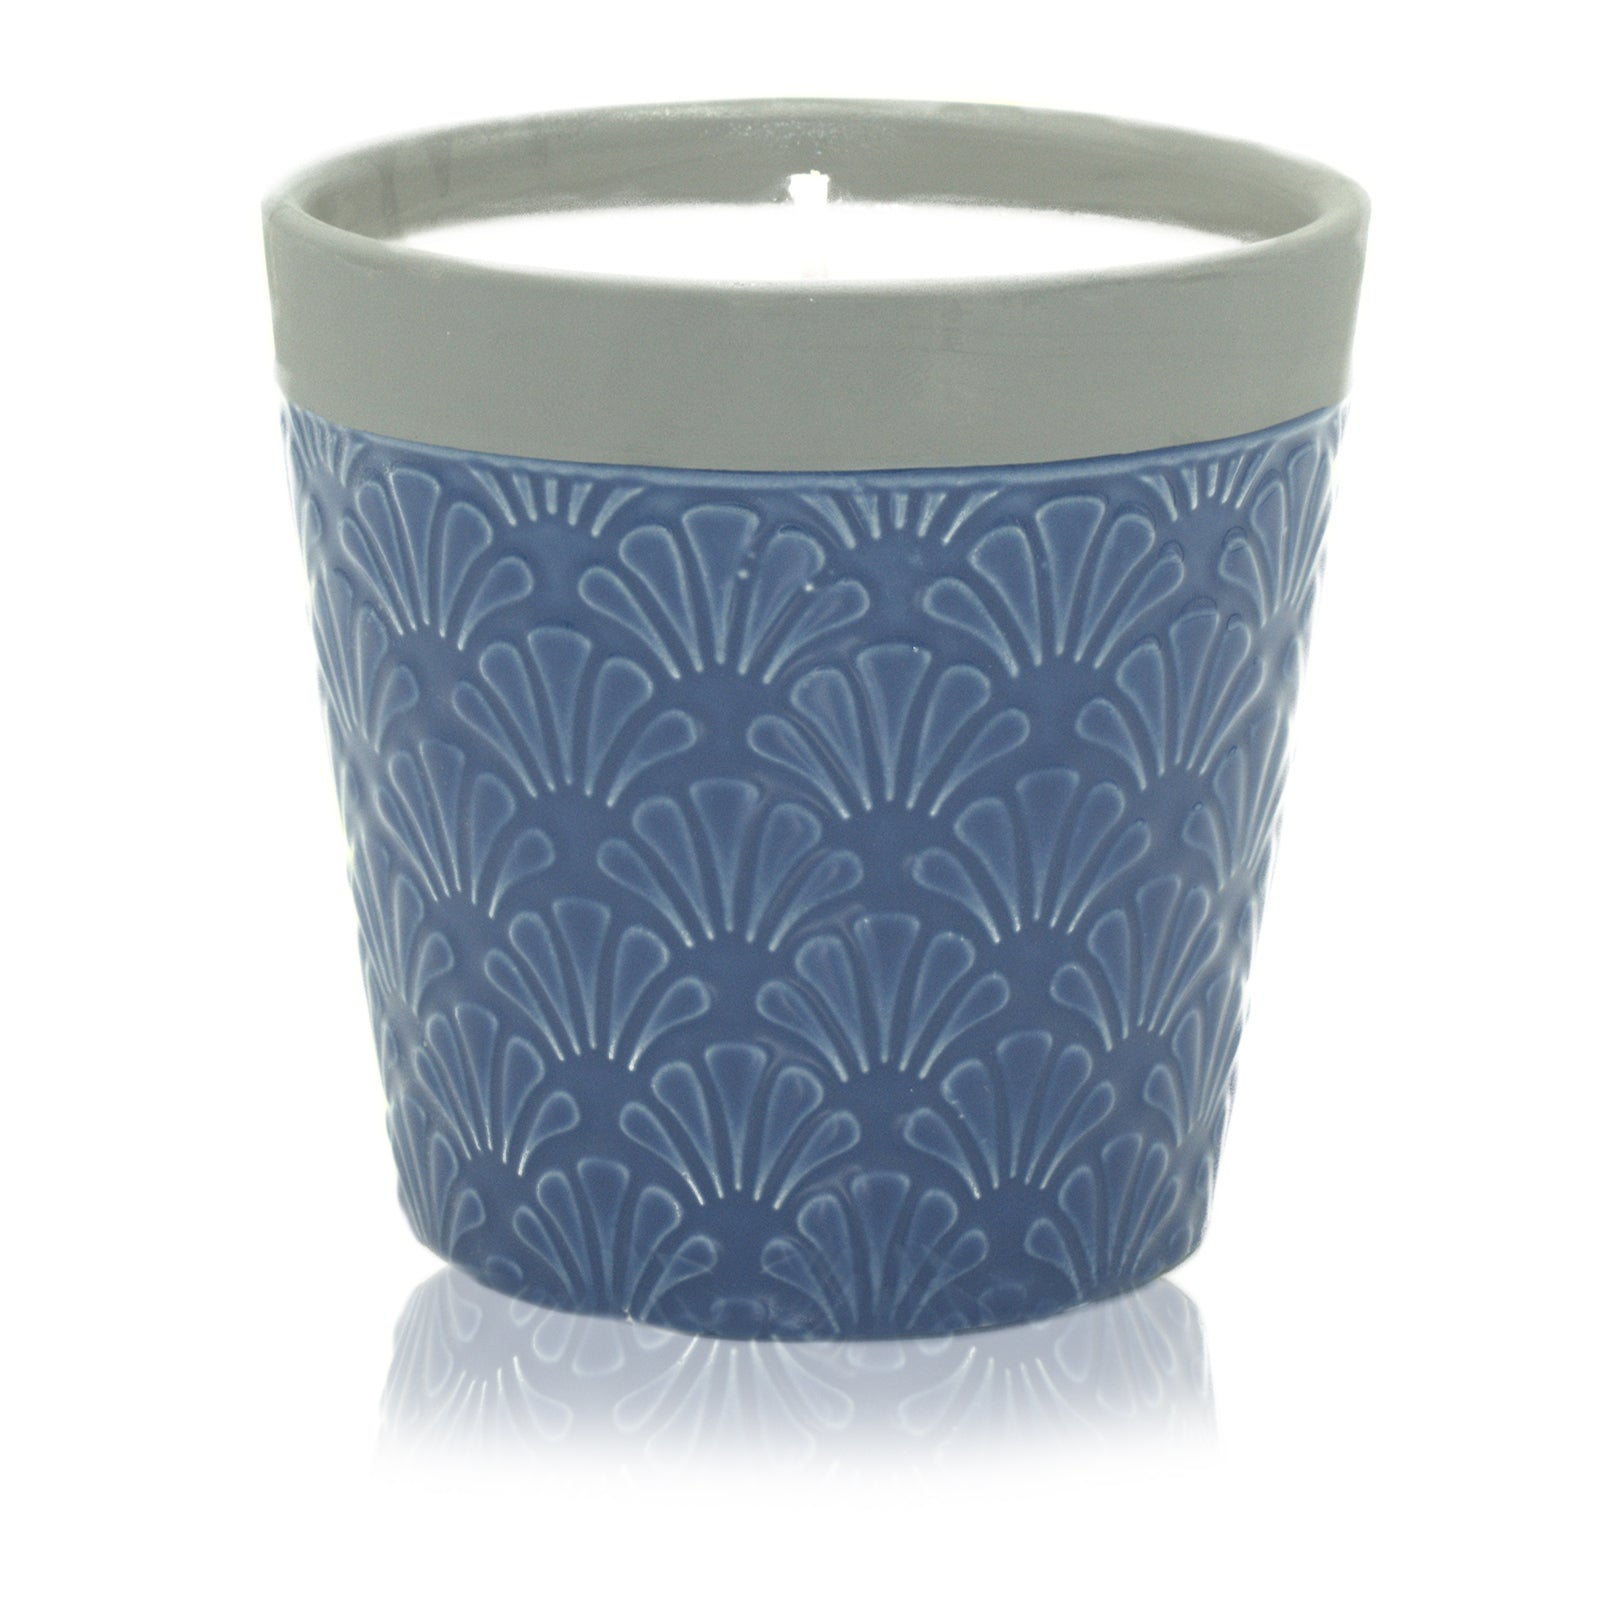 Home is Home Soy Candle Pots